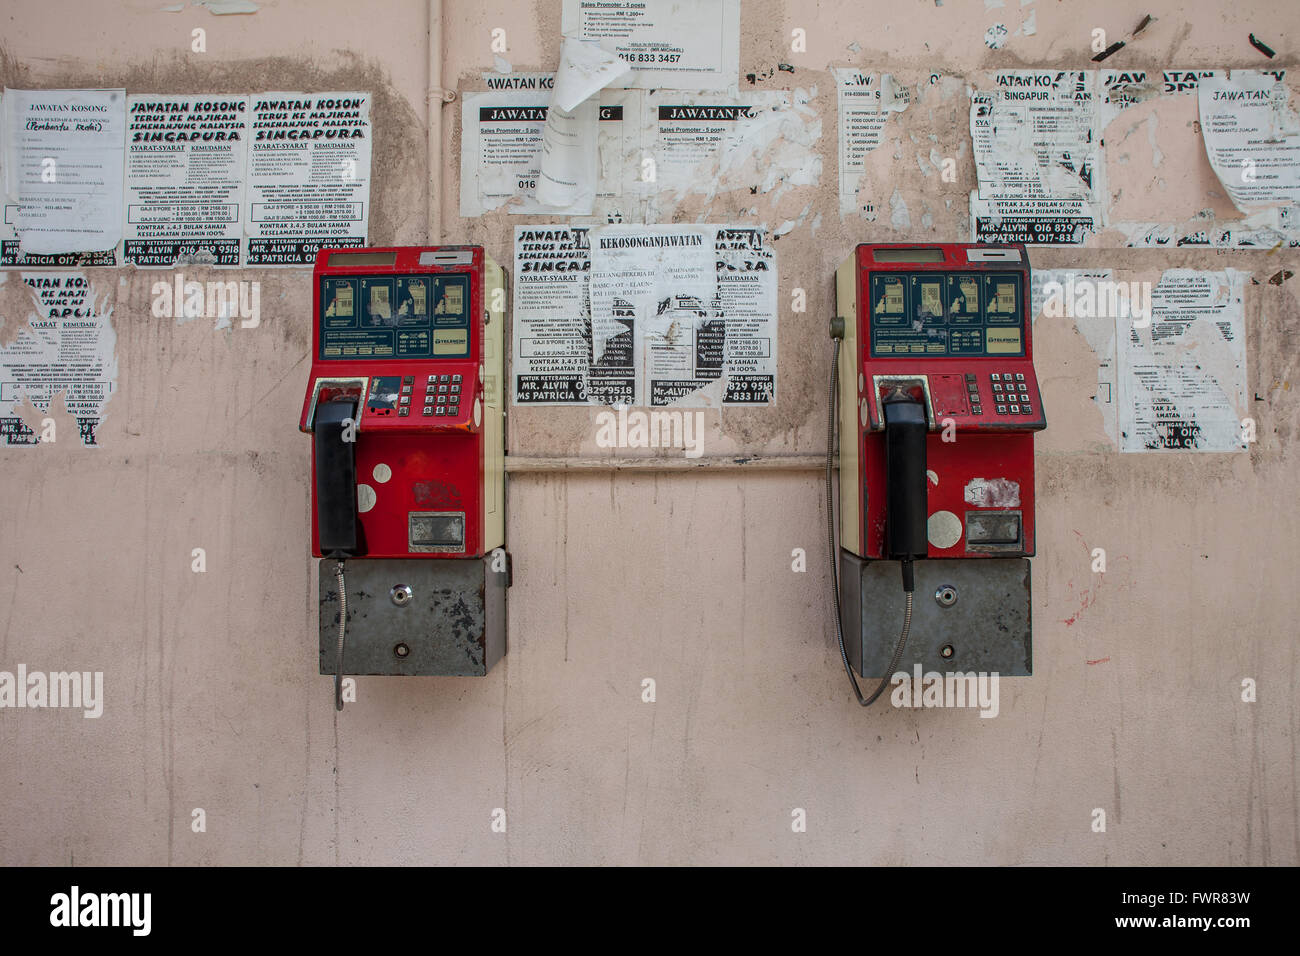 Two old phone boxes or booths hanging on exterior wall. The wall has torn posters and is run down. Stock Photo